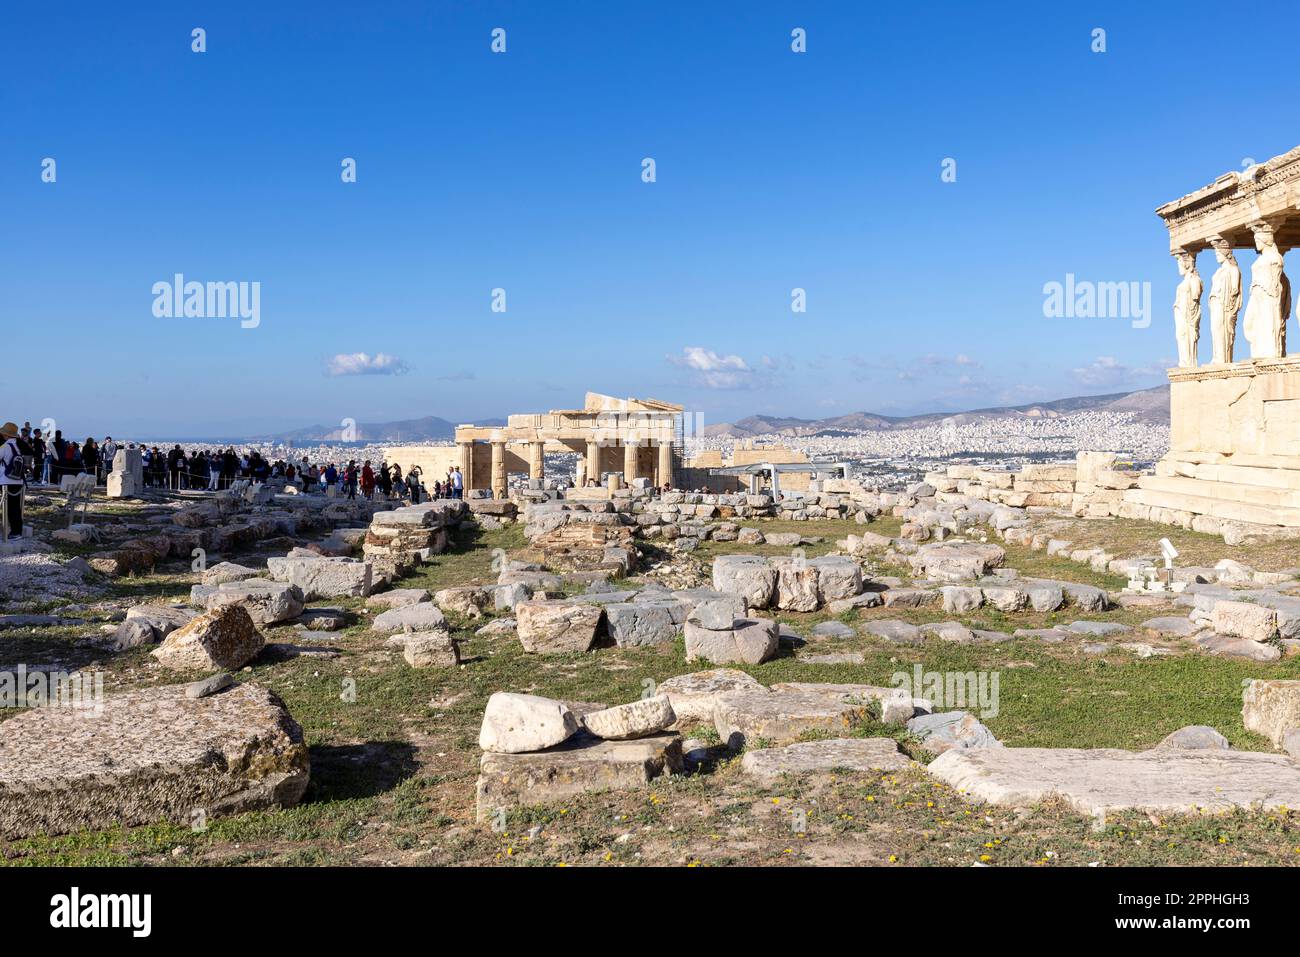 Group of tourists on the ruins of the Acropolis, view of Erechtheion with caryatids and gateway Propylaia, Athens, Greece Stock Photo